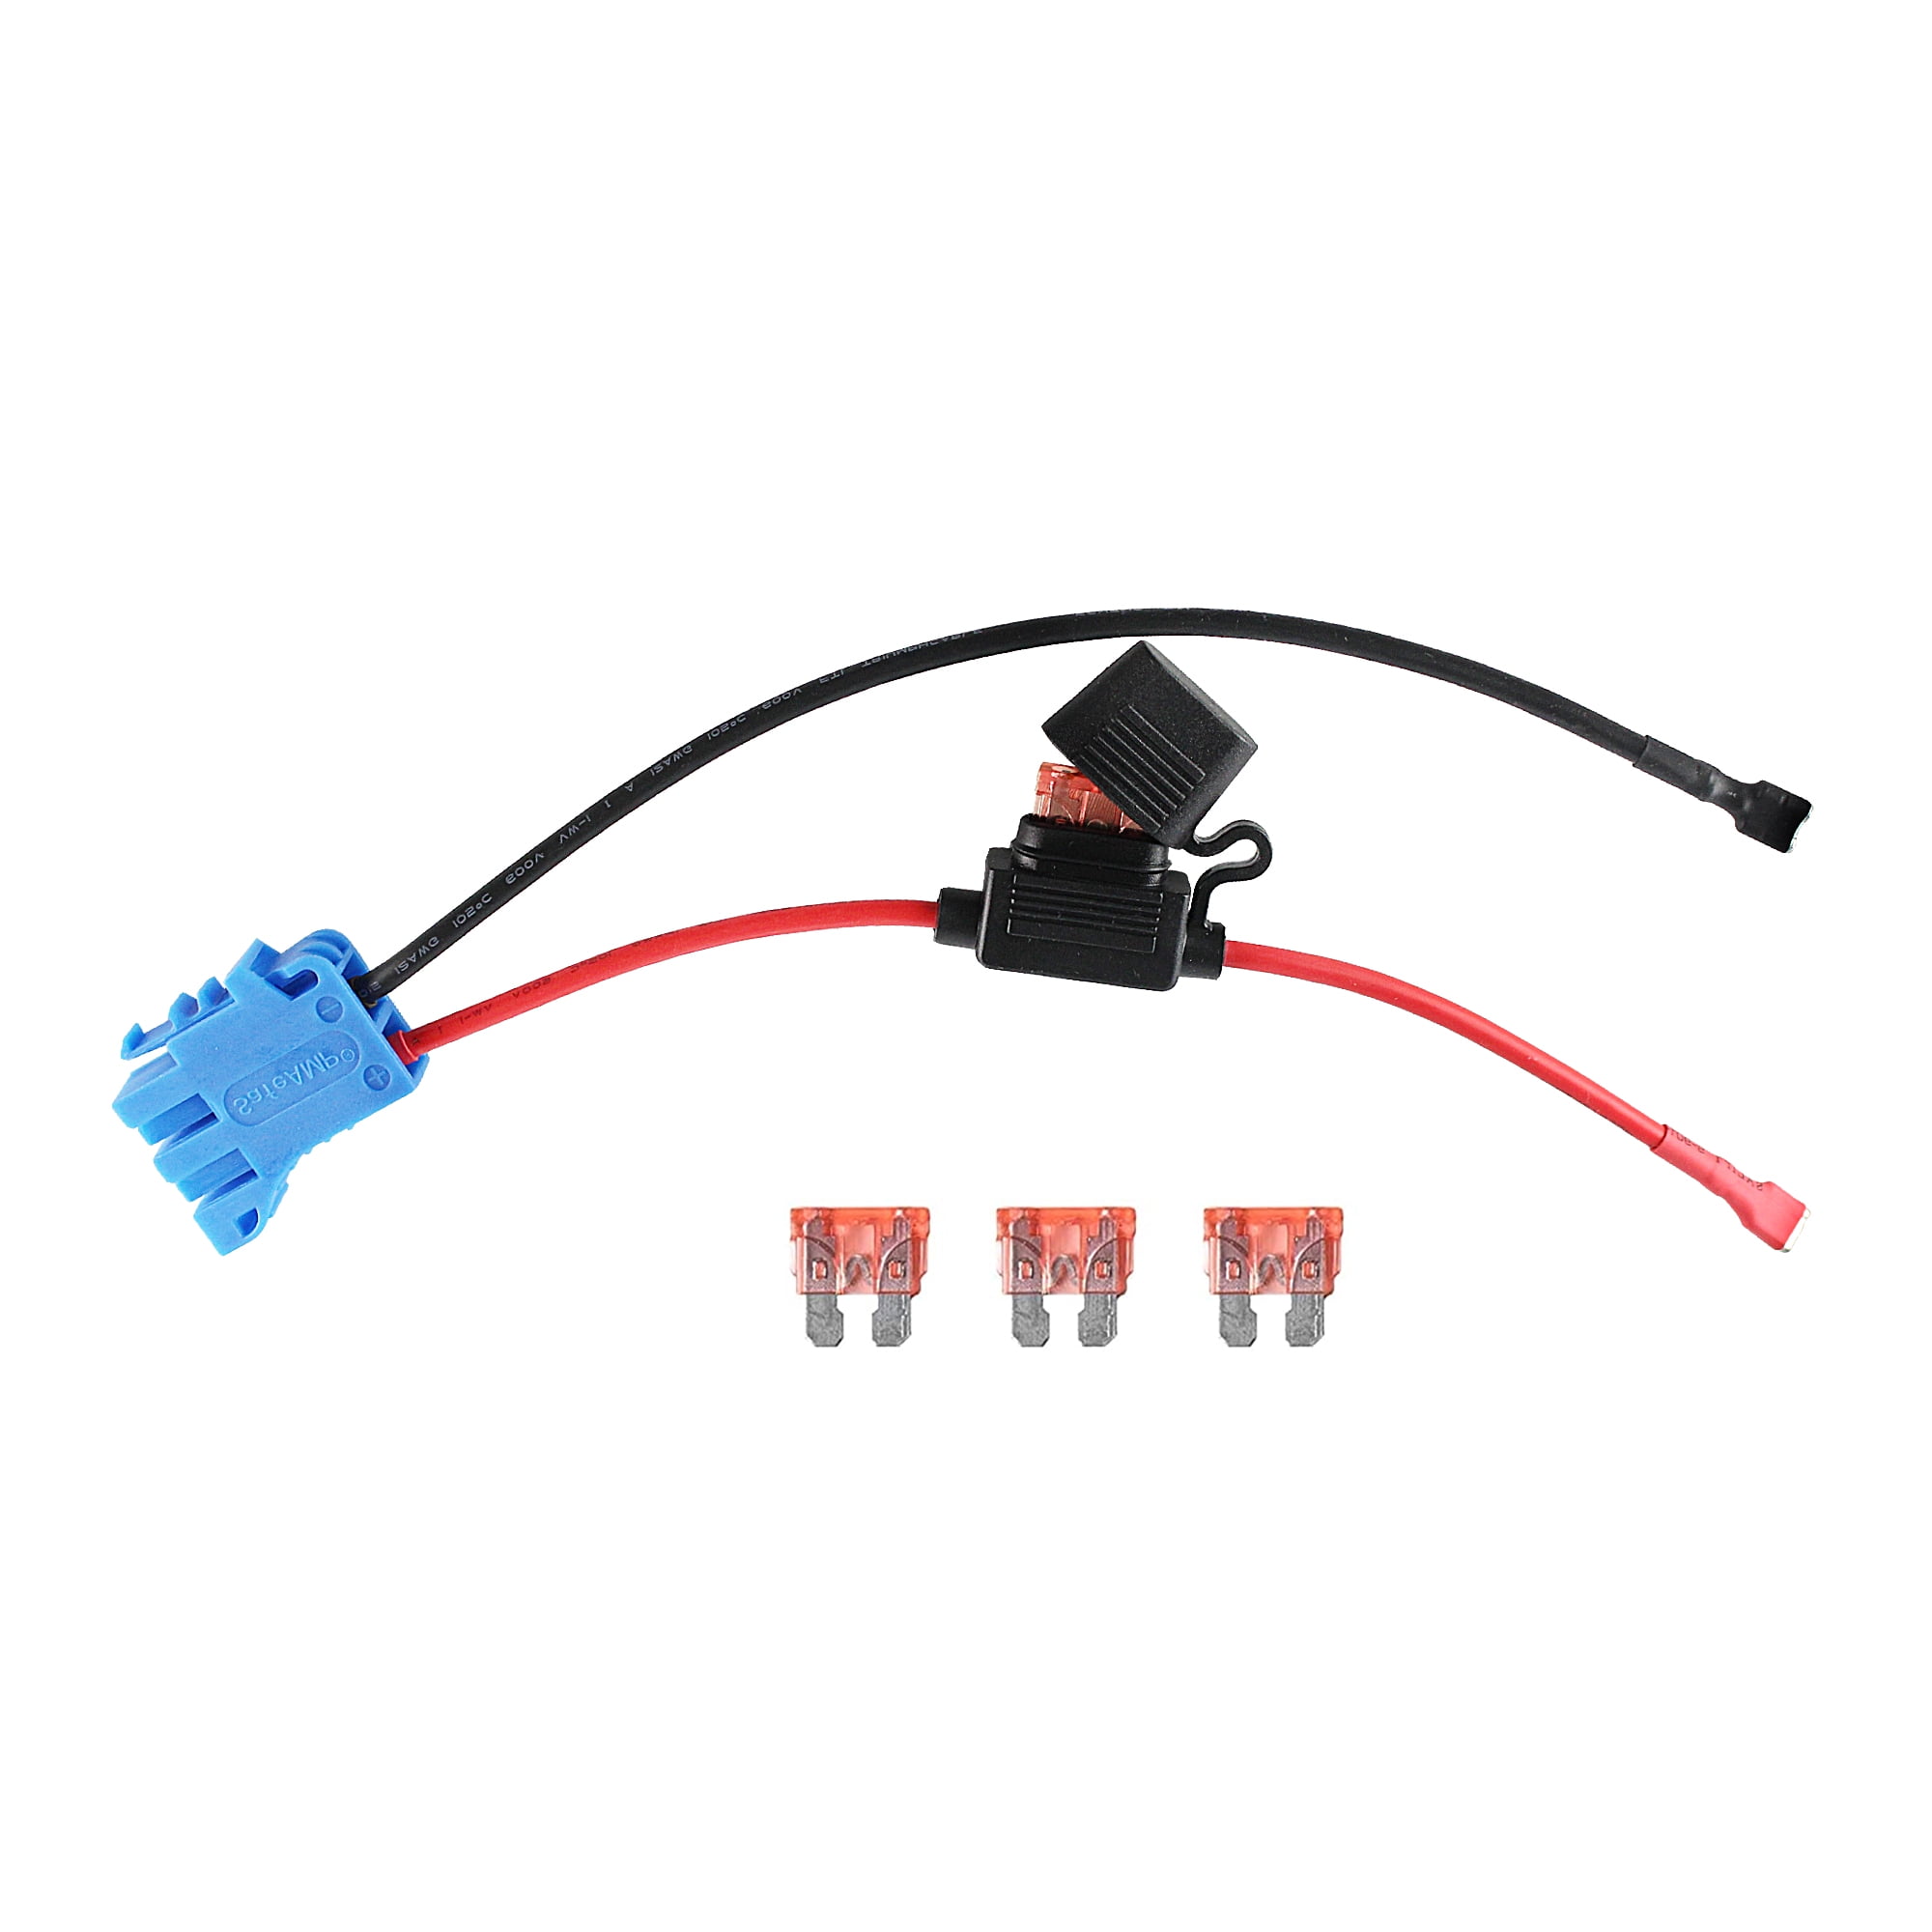 SafeAMP Wire Harness Connector for Peg-Perego 12-Volt SLA Battery 